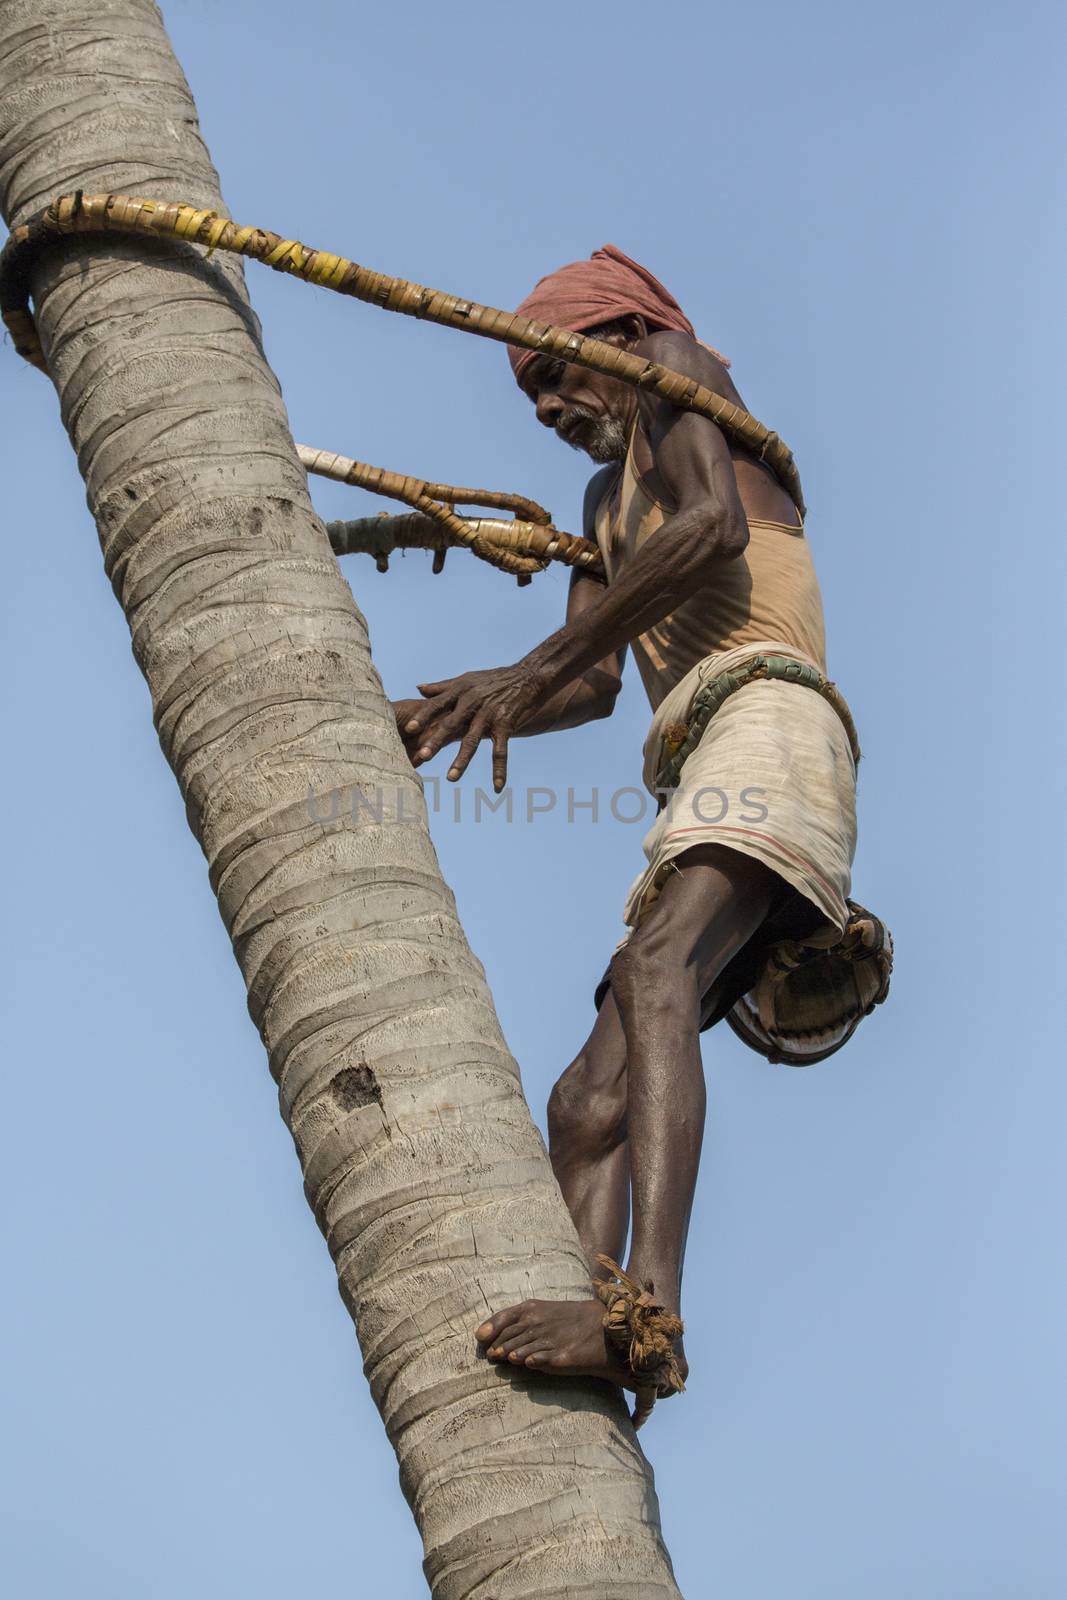 Editorial documentary. Old climber on coconut tree by CatherineL-Prod